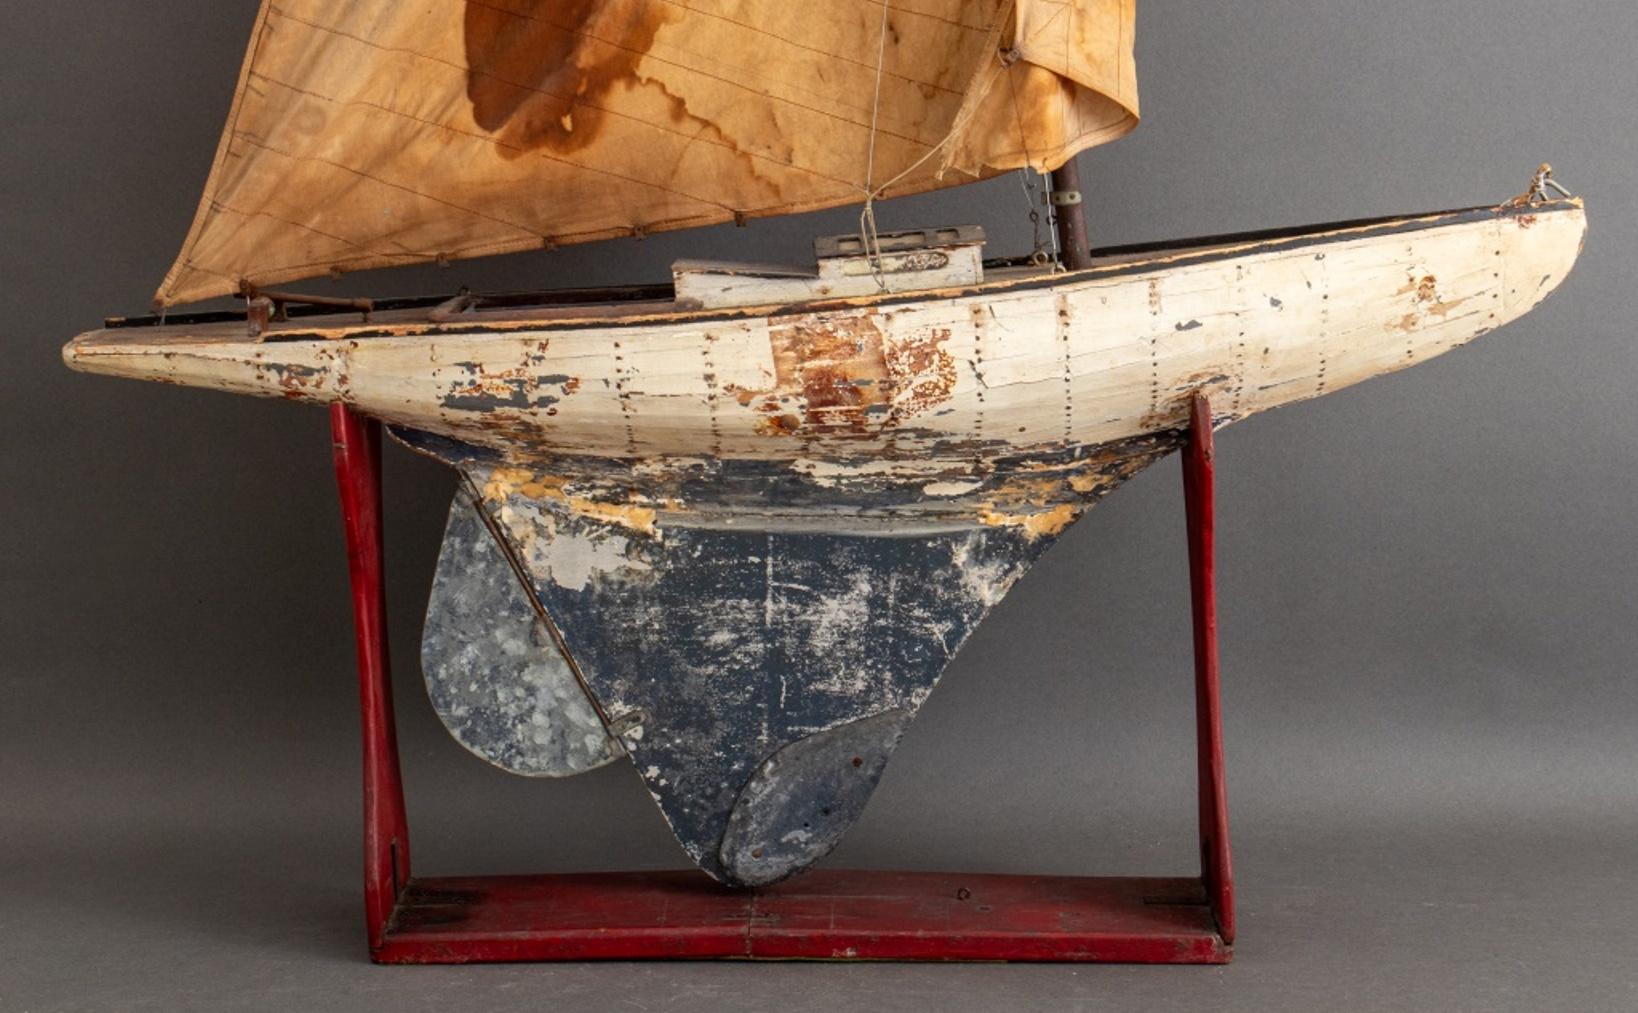 American polychromed wooden boat model on stand, with polychrome painted decoration, and linen sails, original condition.

Dimensions: 60